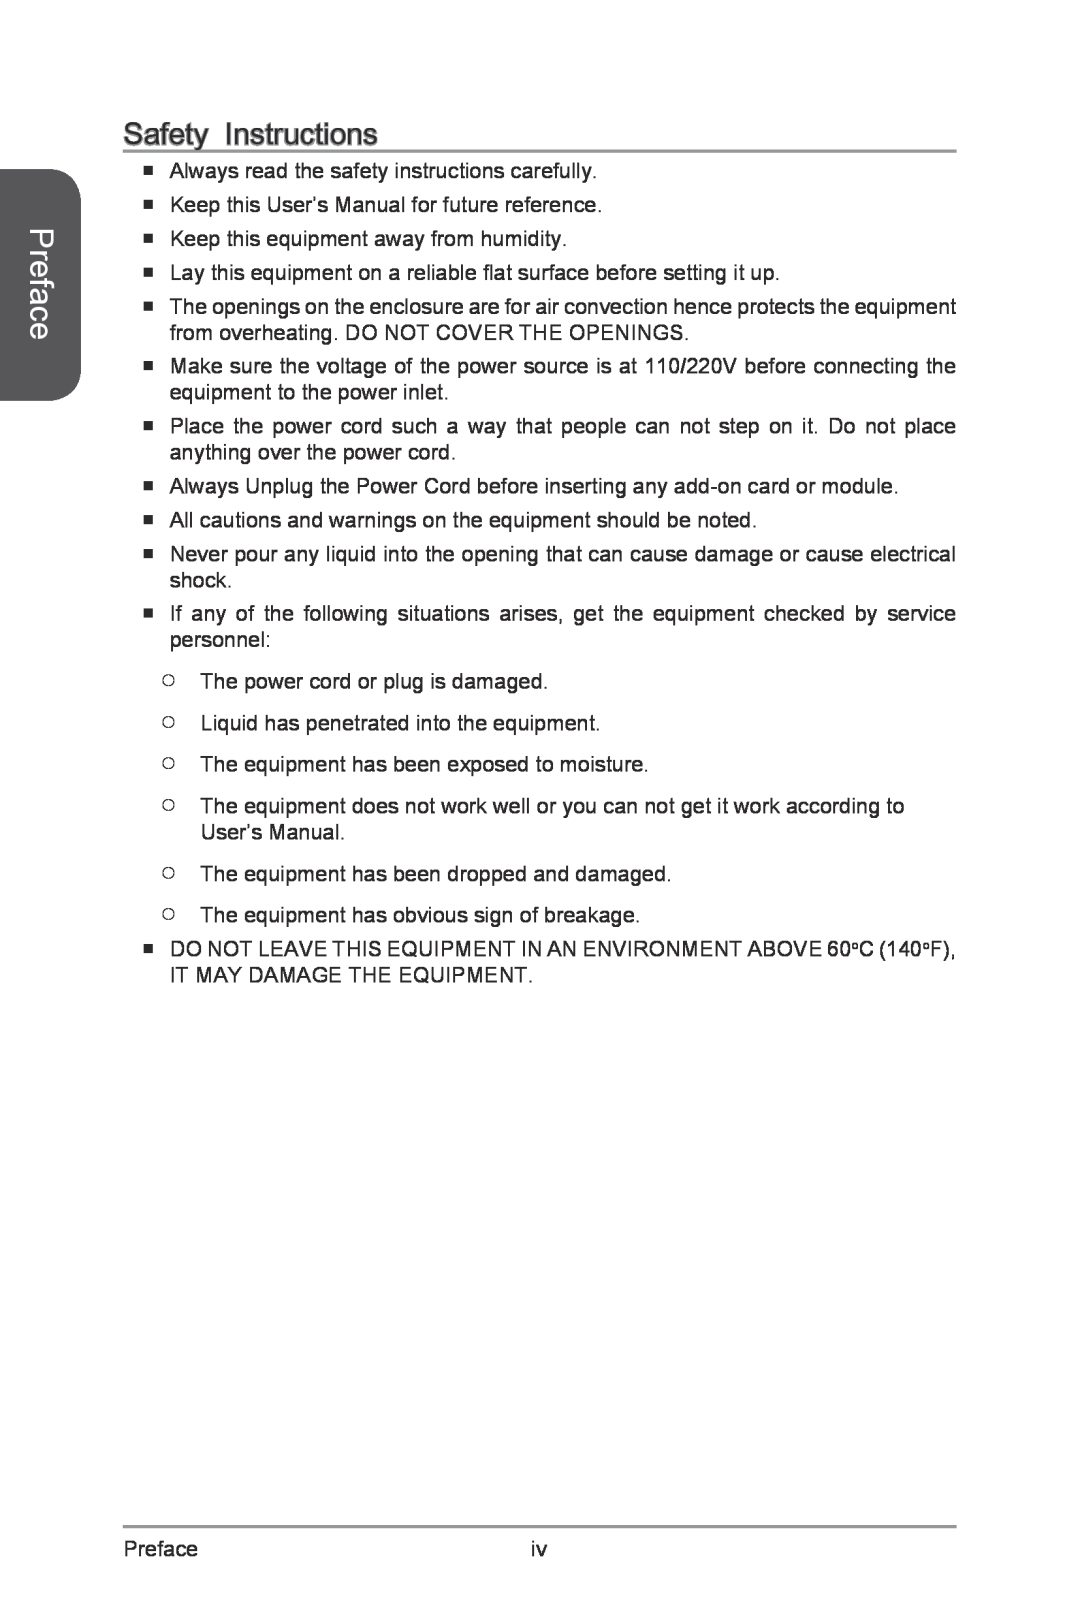 MSI Z87-XPOWER manual Safety Instructions, Preface 